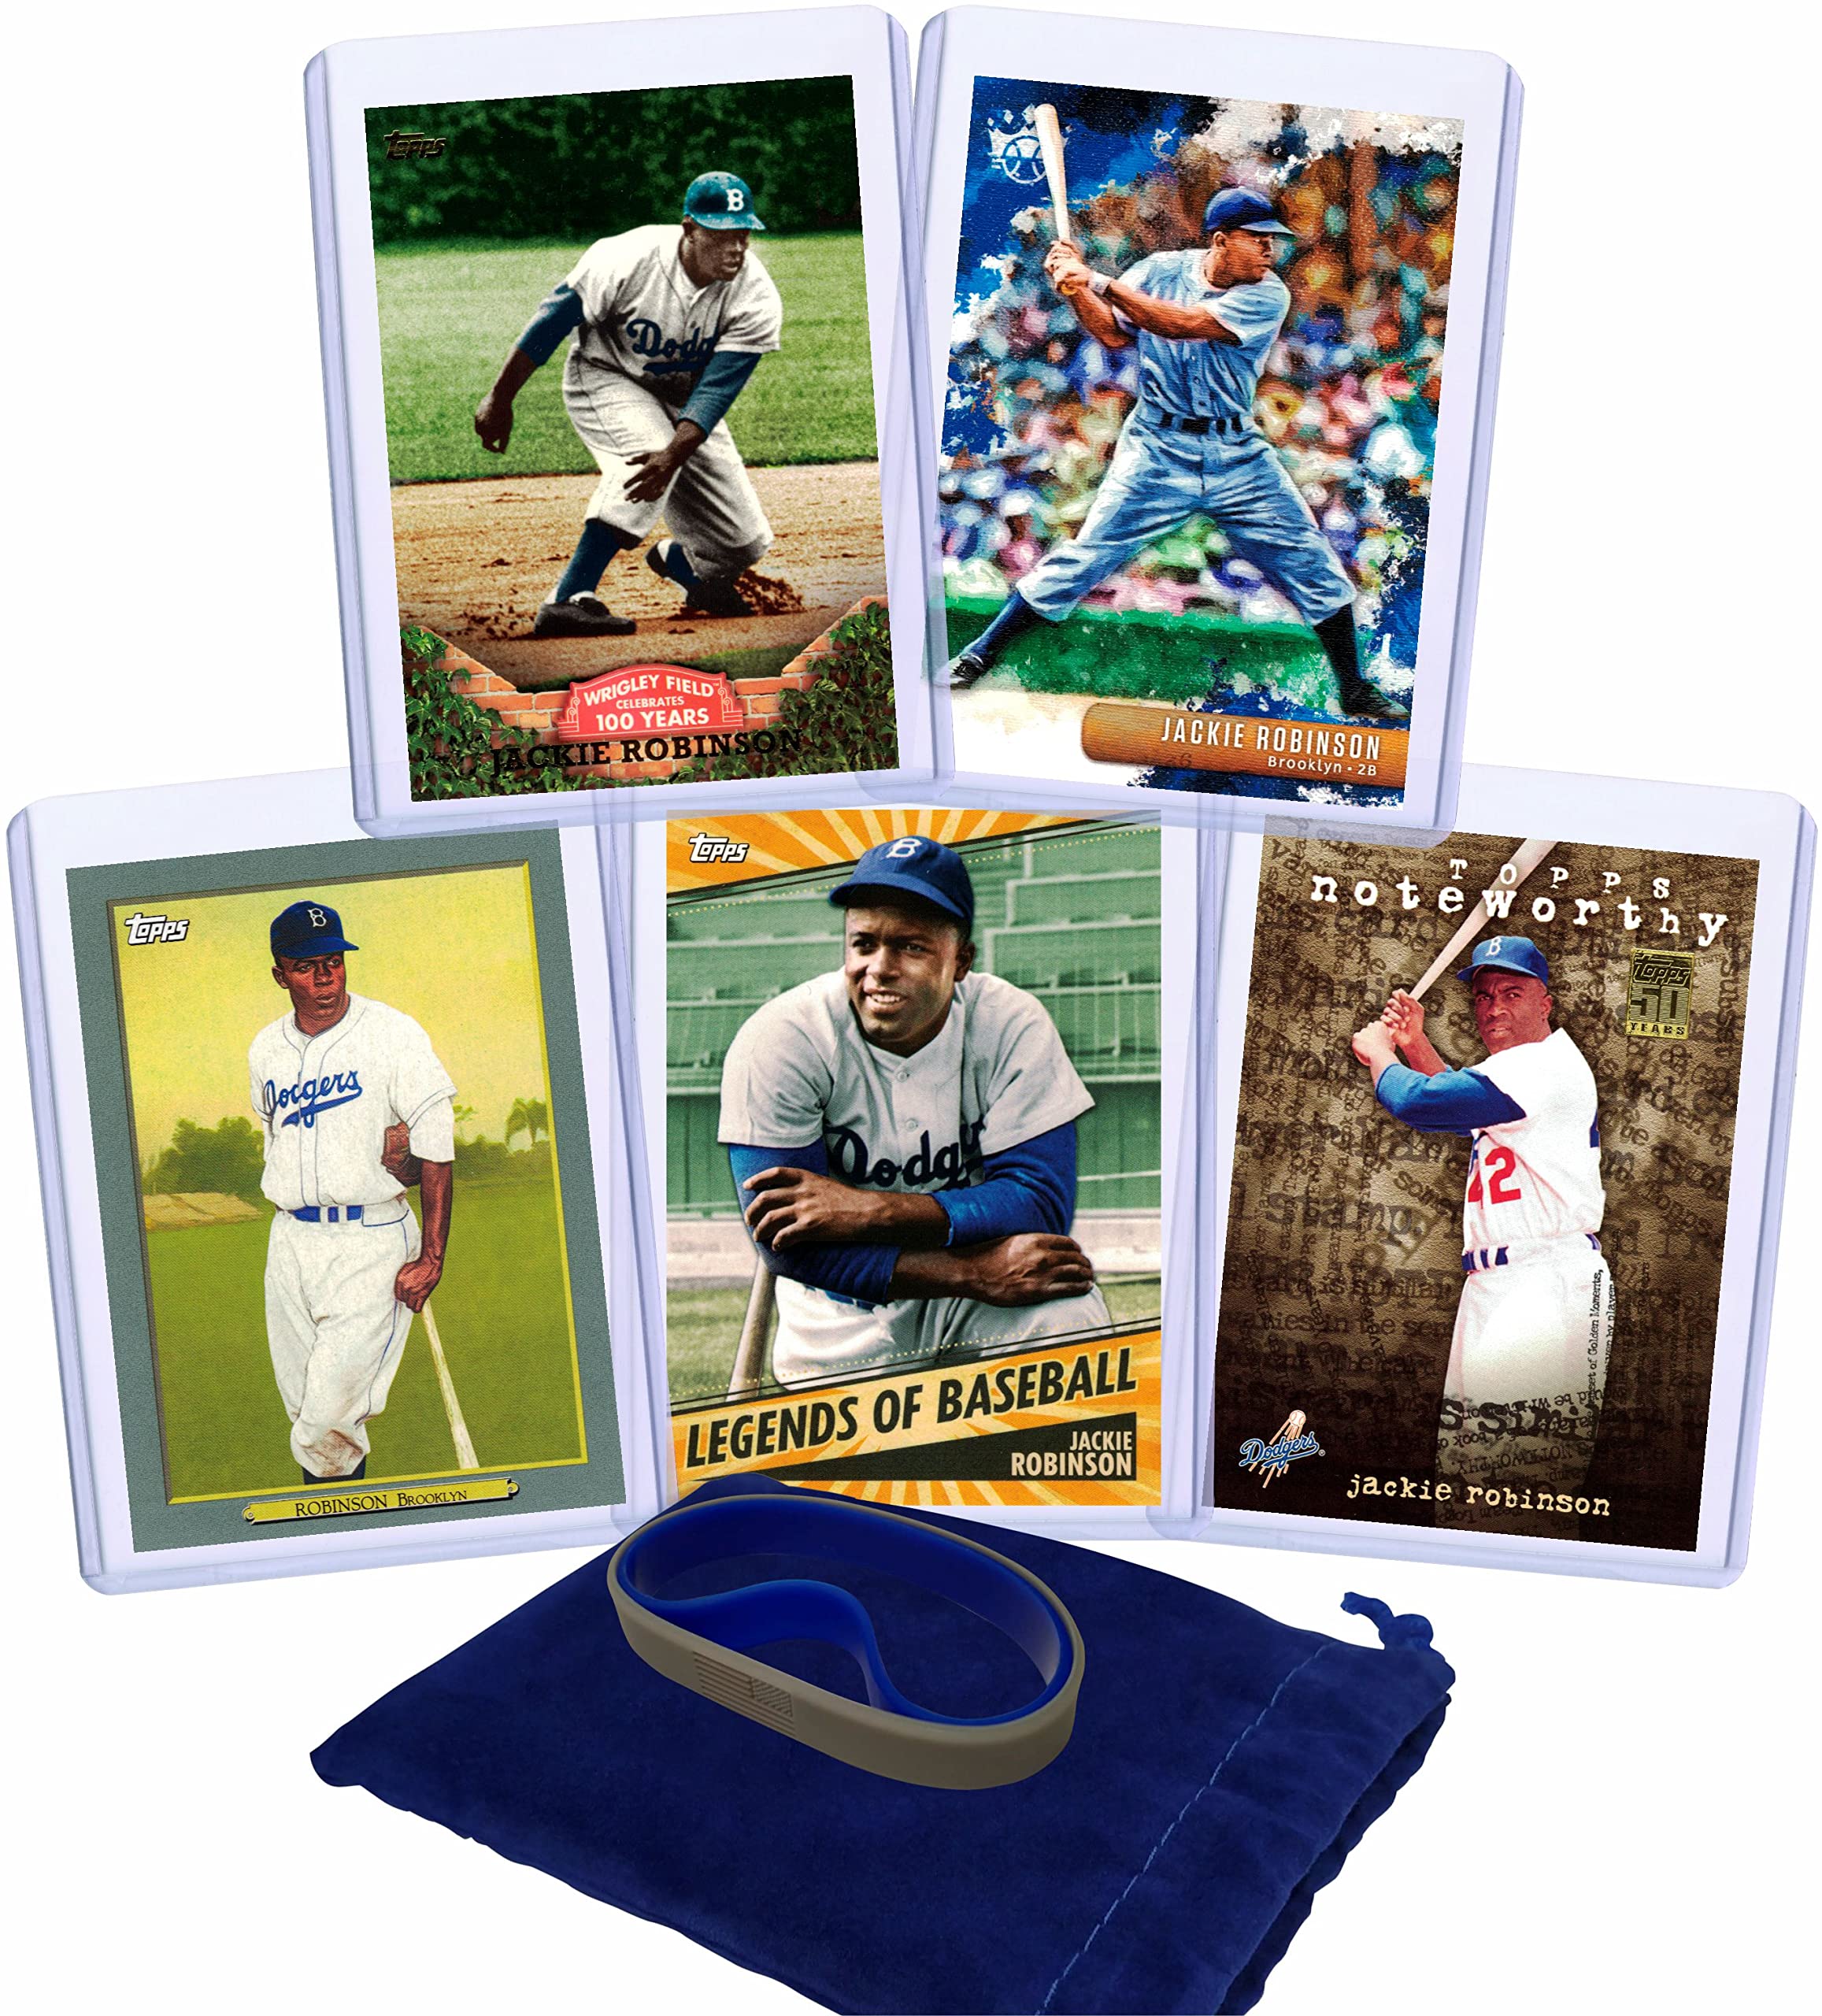 Jackie Robinson Baseball Cards (5) Assorted Brooklyn Dodgers Trading Card and Wristbands Gift Bundle